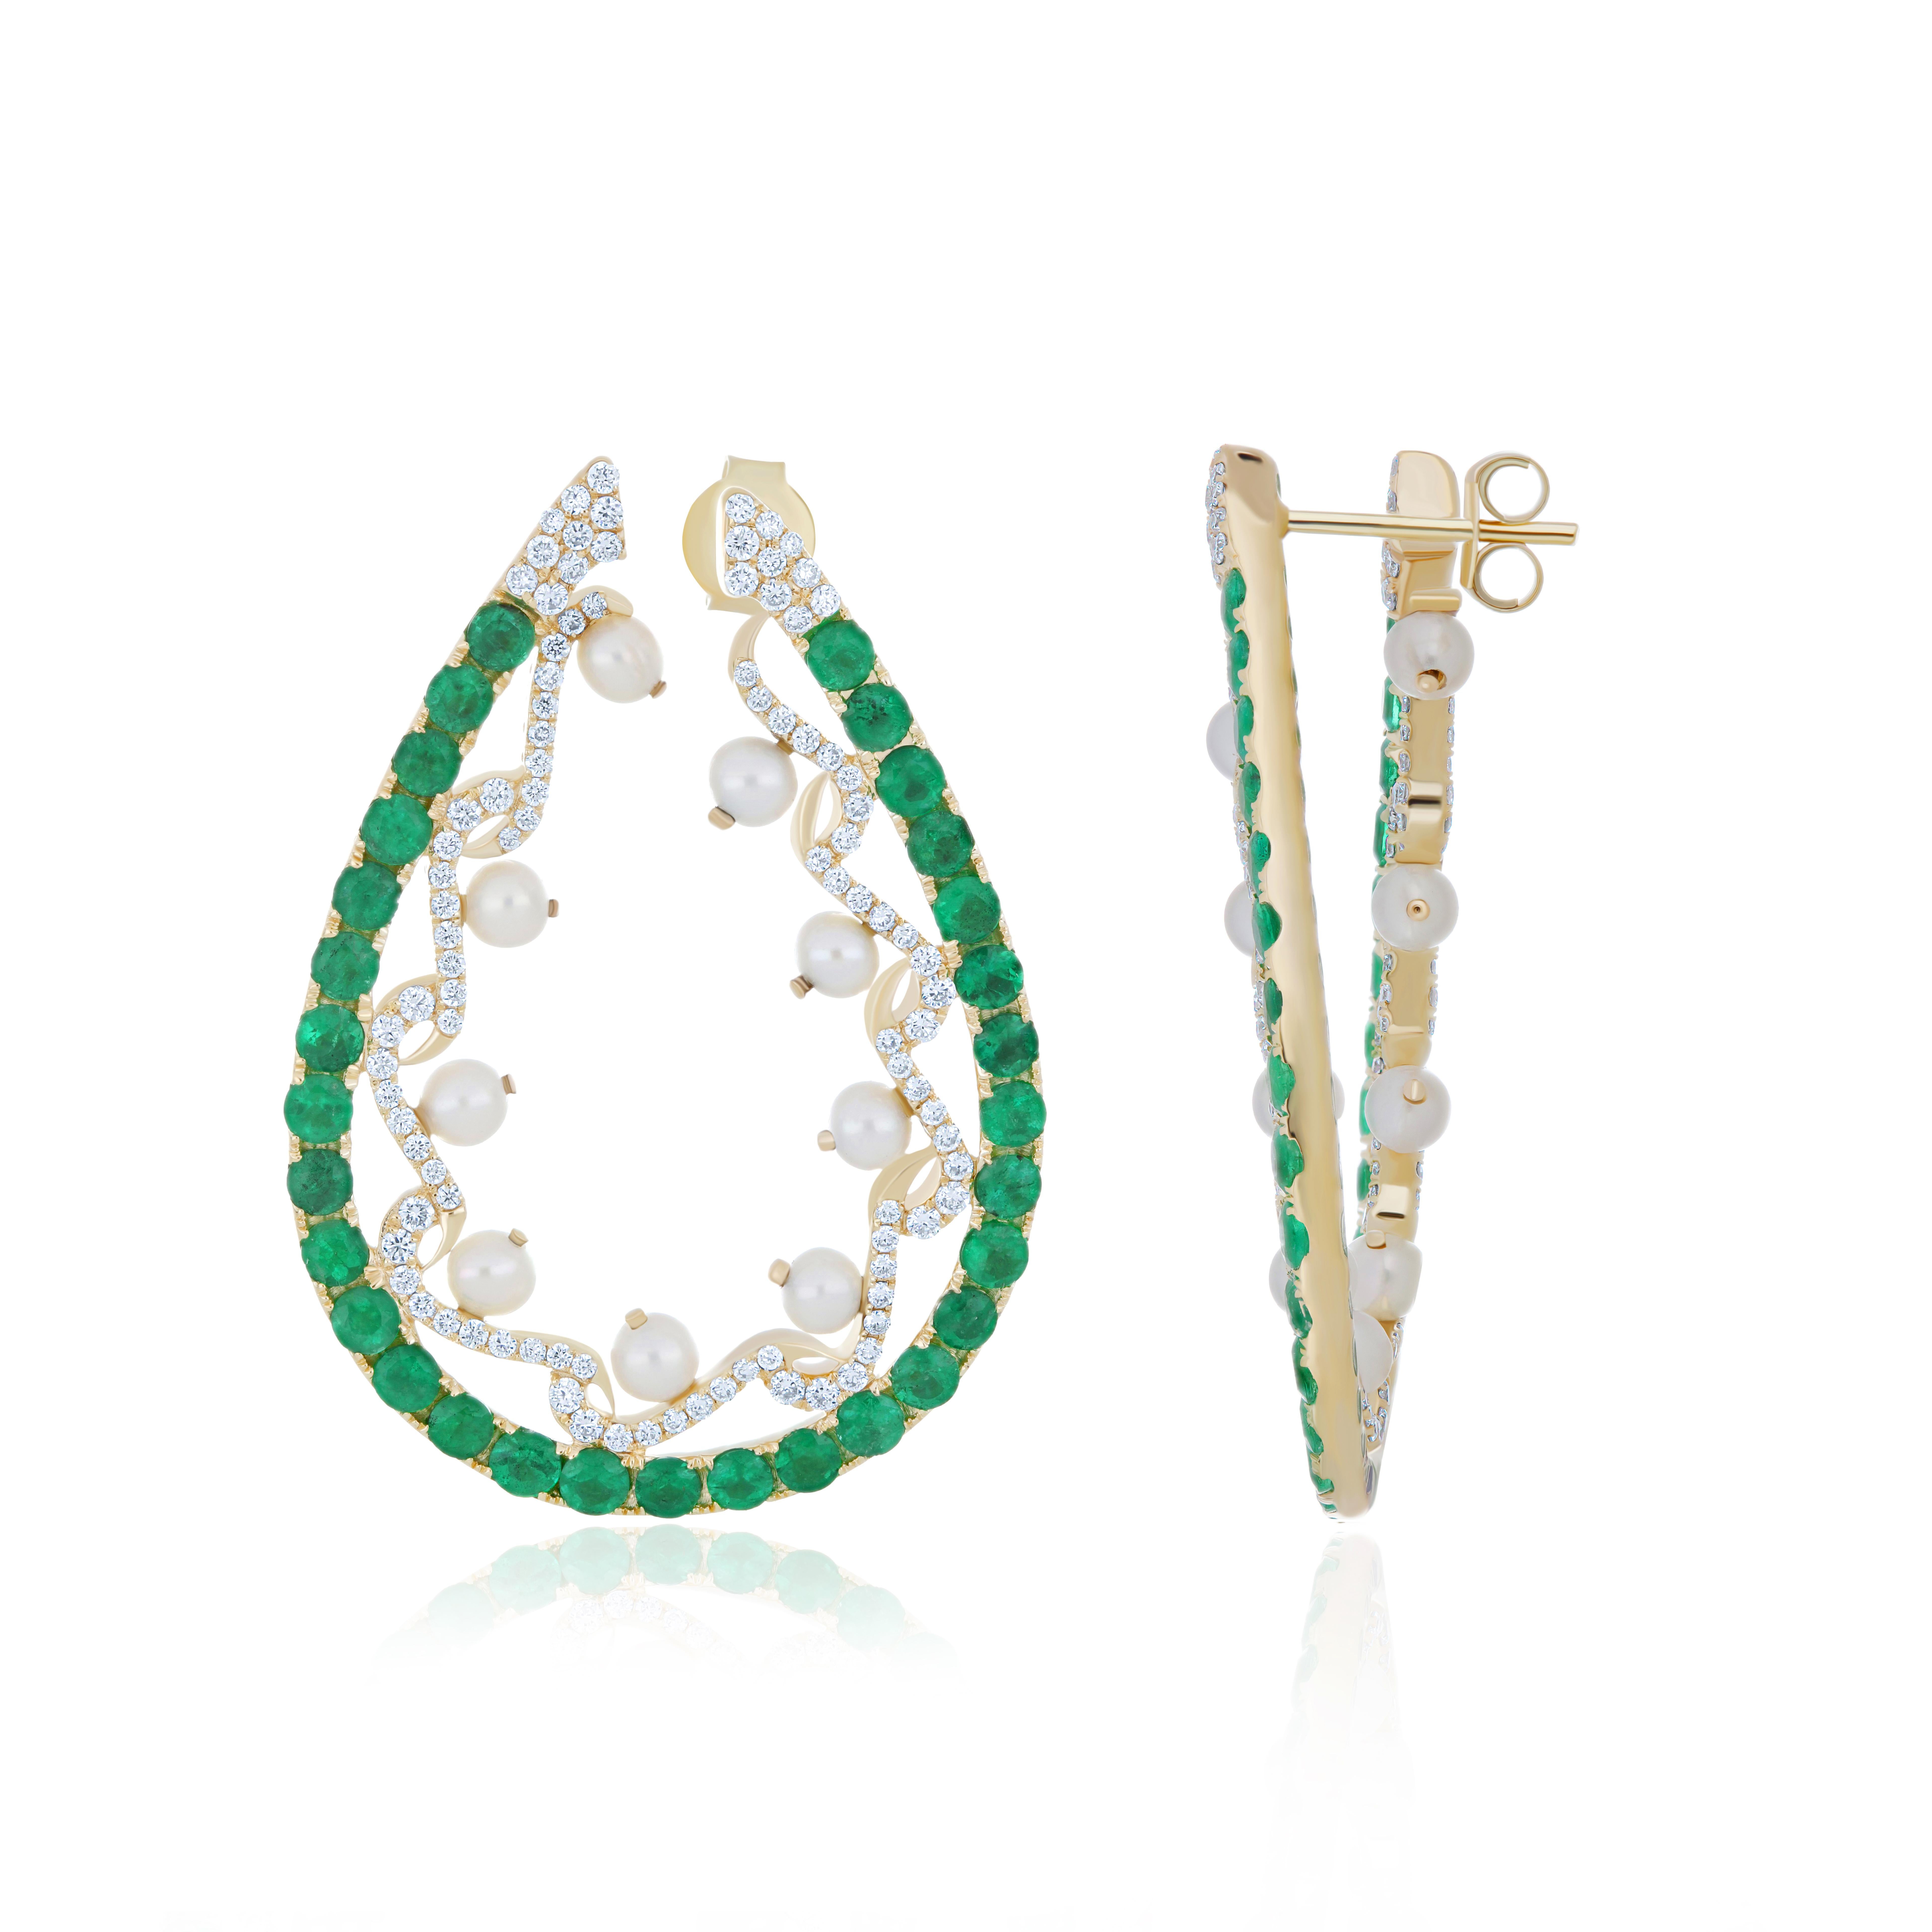 Elegant and Exquisitely Detailed Earring made in  14Karat Yellow Gold Earring set with Round Cut Emerald weighing approx.3.6 Cts &  Pearl weighing approx.4.60Cts, accented with micro pave Set Diamond weighing approx. 1.9 Cts Beautifully Hand-Crafted